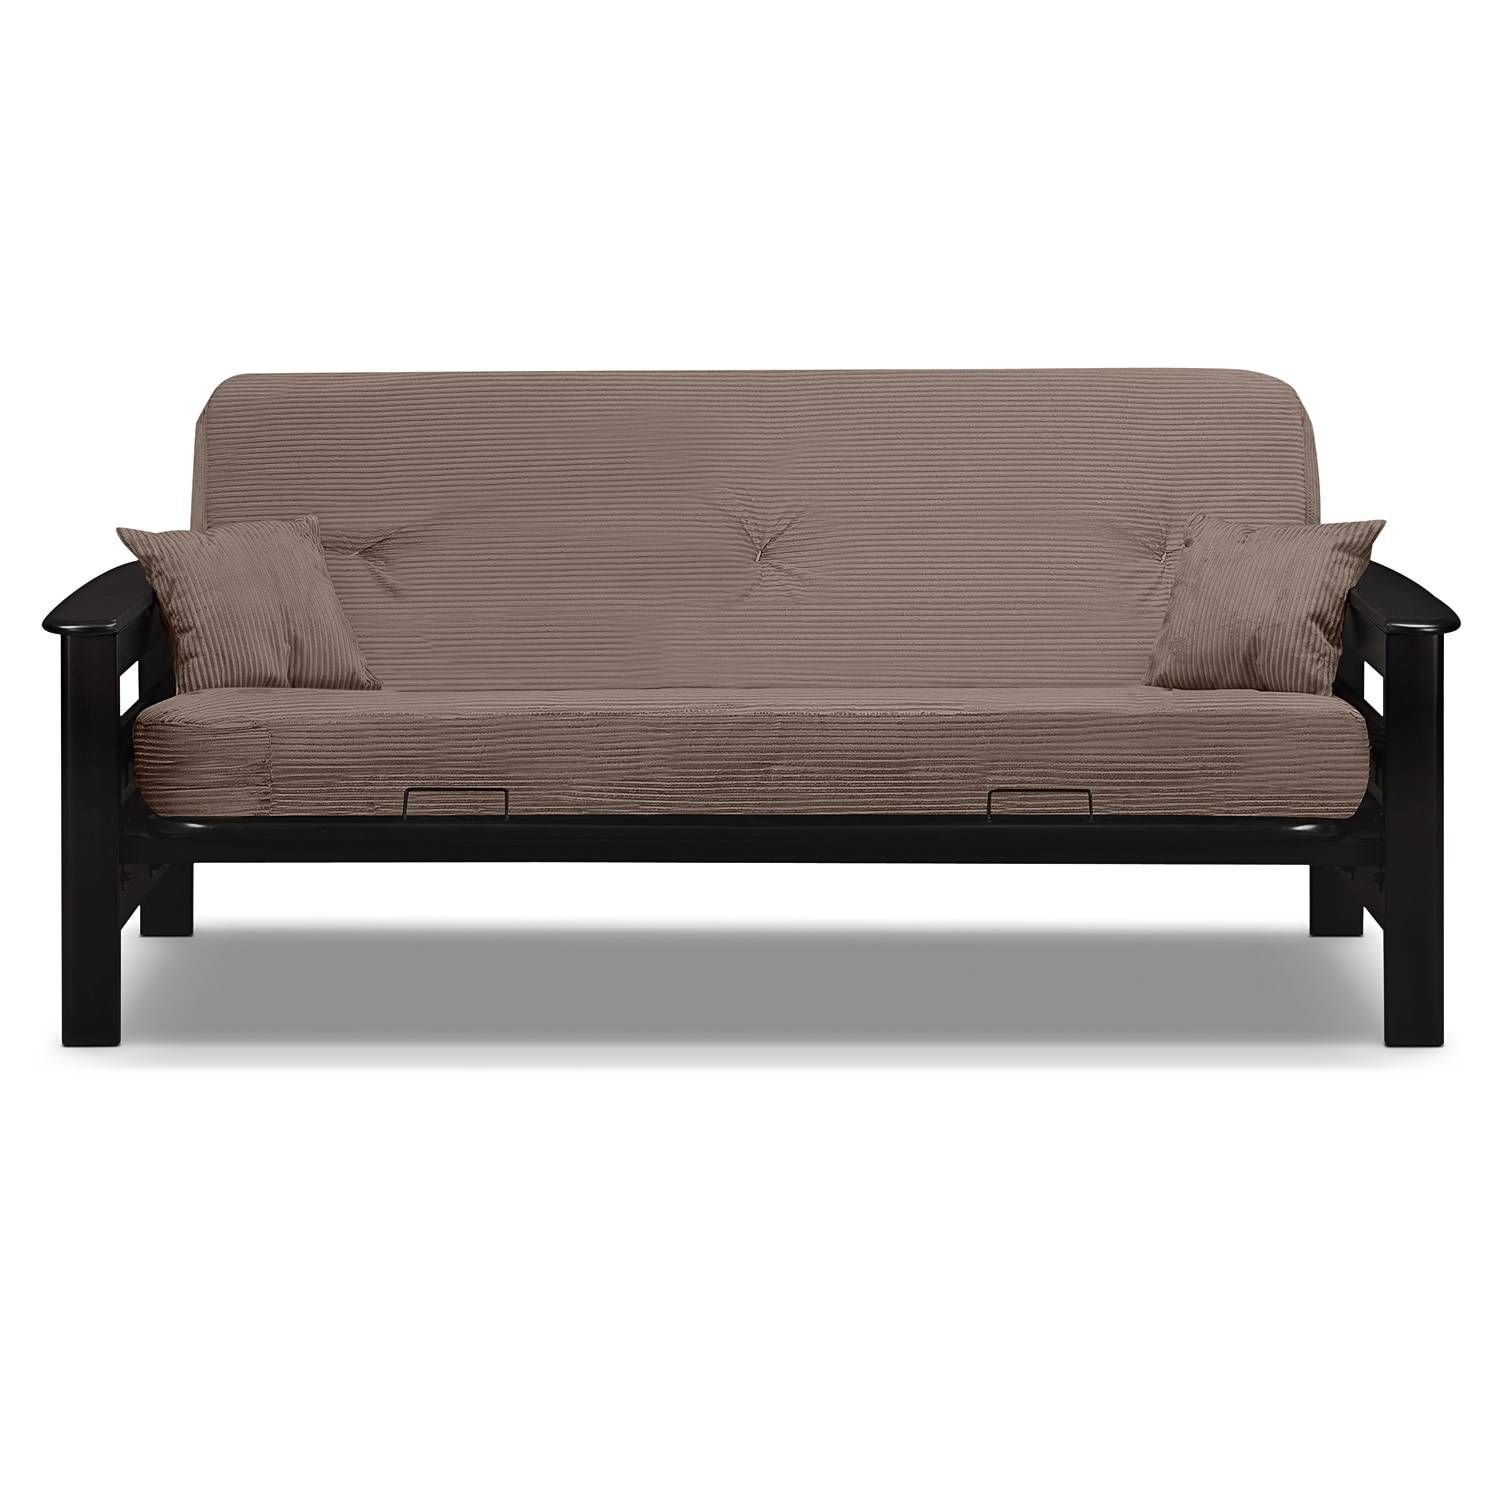 Tampa Futon Sofa Bed – Beige | Value City Furniture With Regard To Sofas Tampa (Photo 5 of 25)